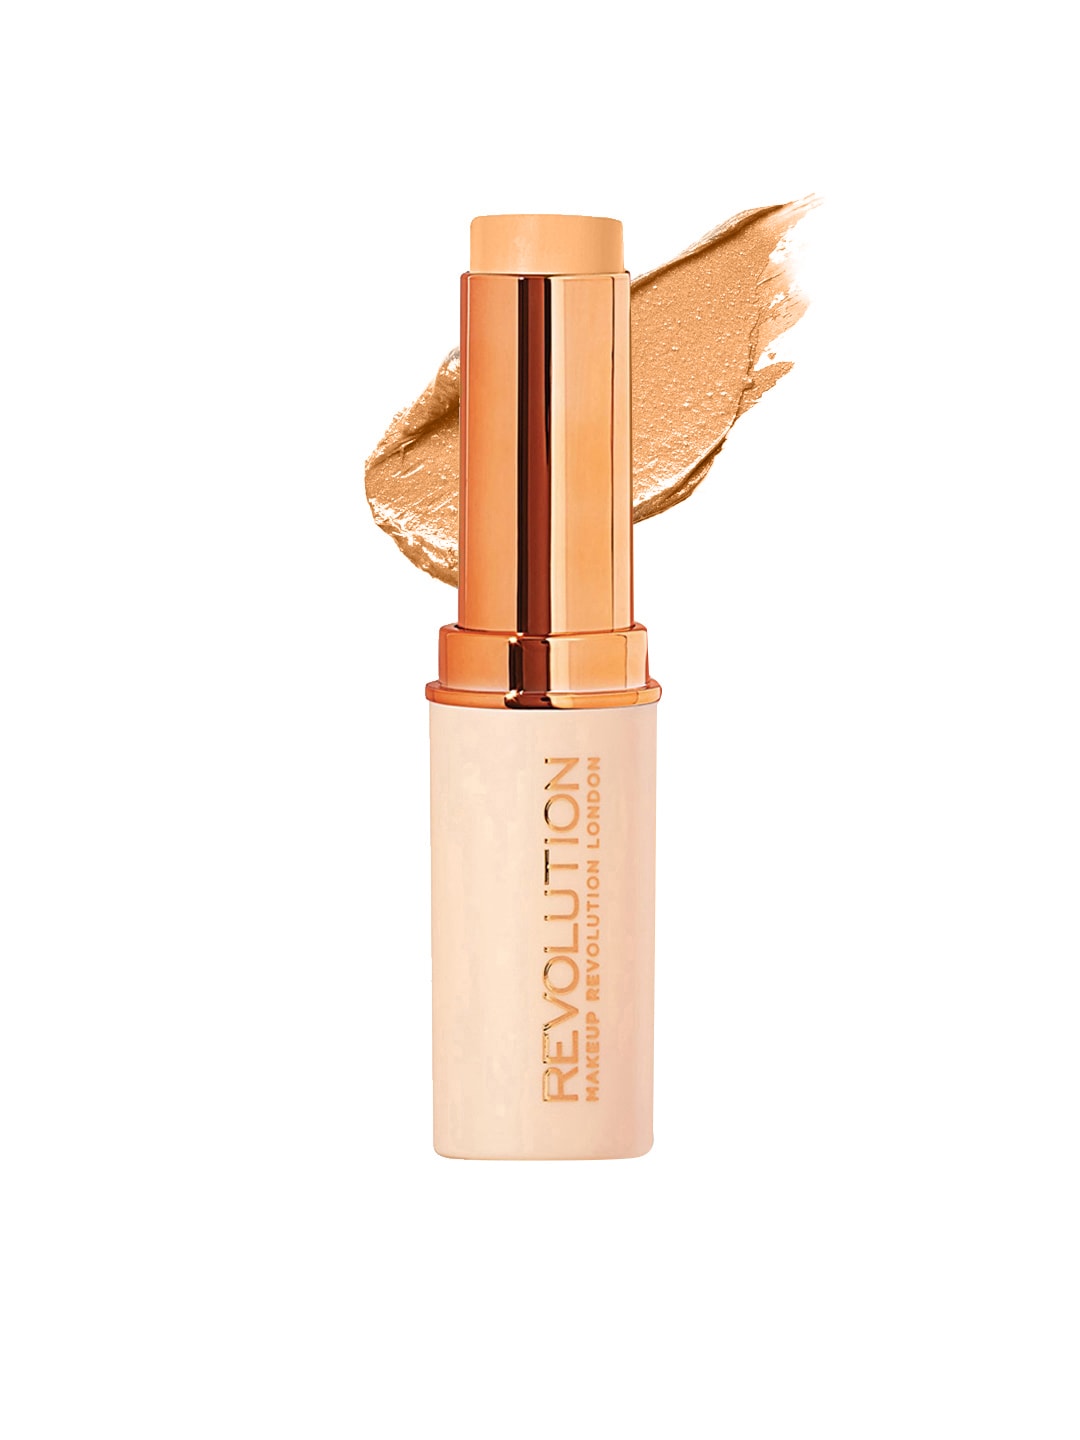 Makeup Revolution Fast Base Stick Foundation - F8 6.2g Price in India